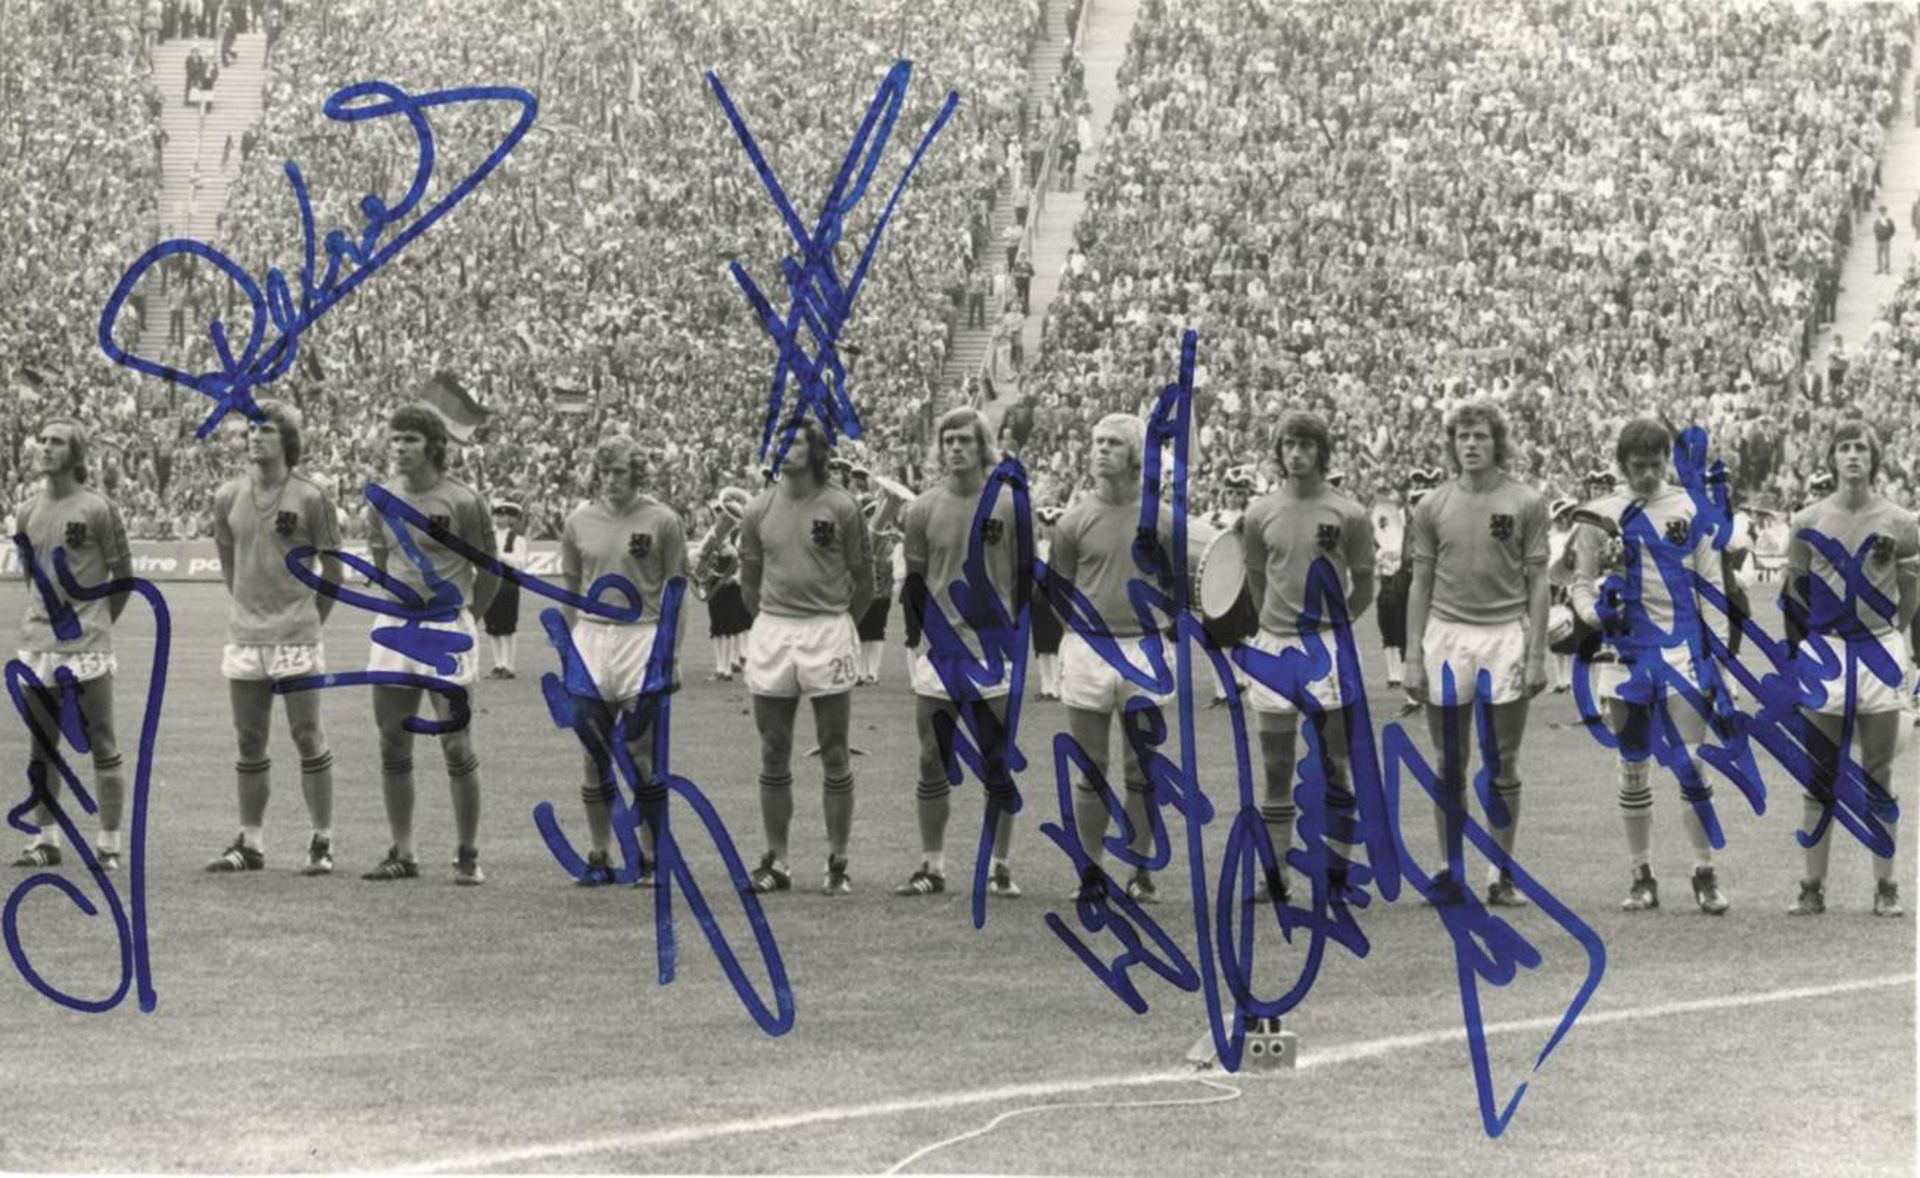 World Cup 1974 B/W-Pressfoto Netherlands Autograh - Black-and-white press photo of the Dutch Final